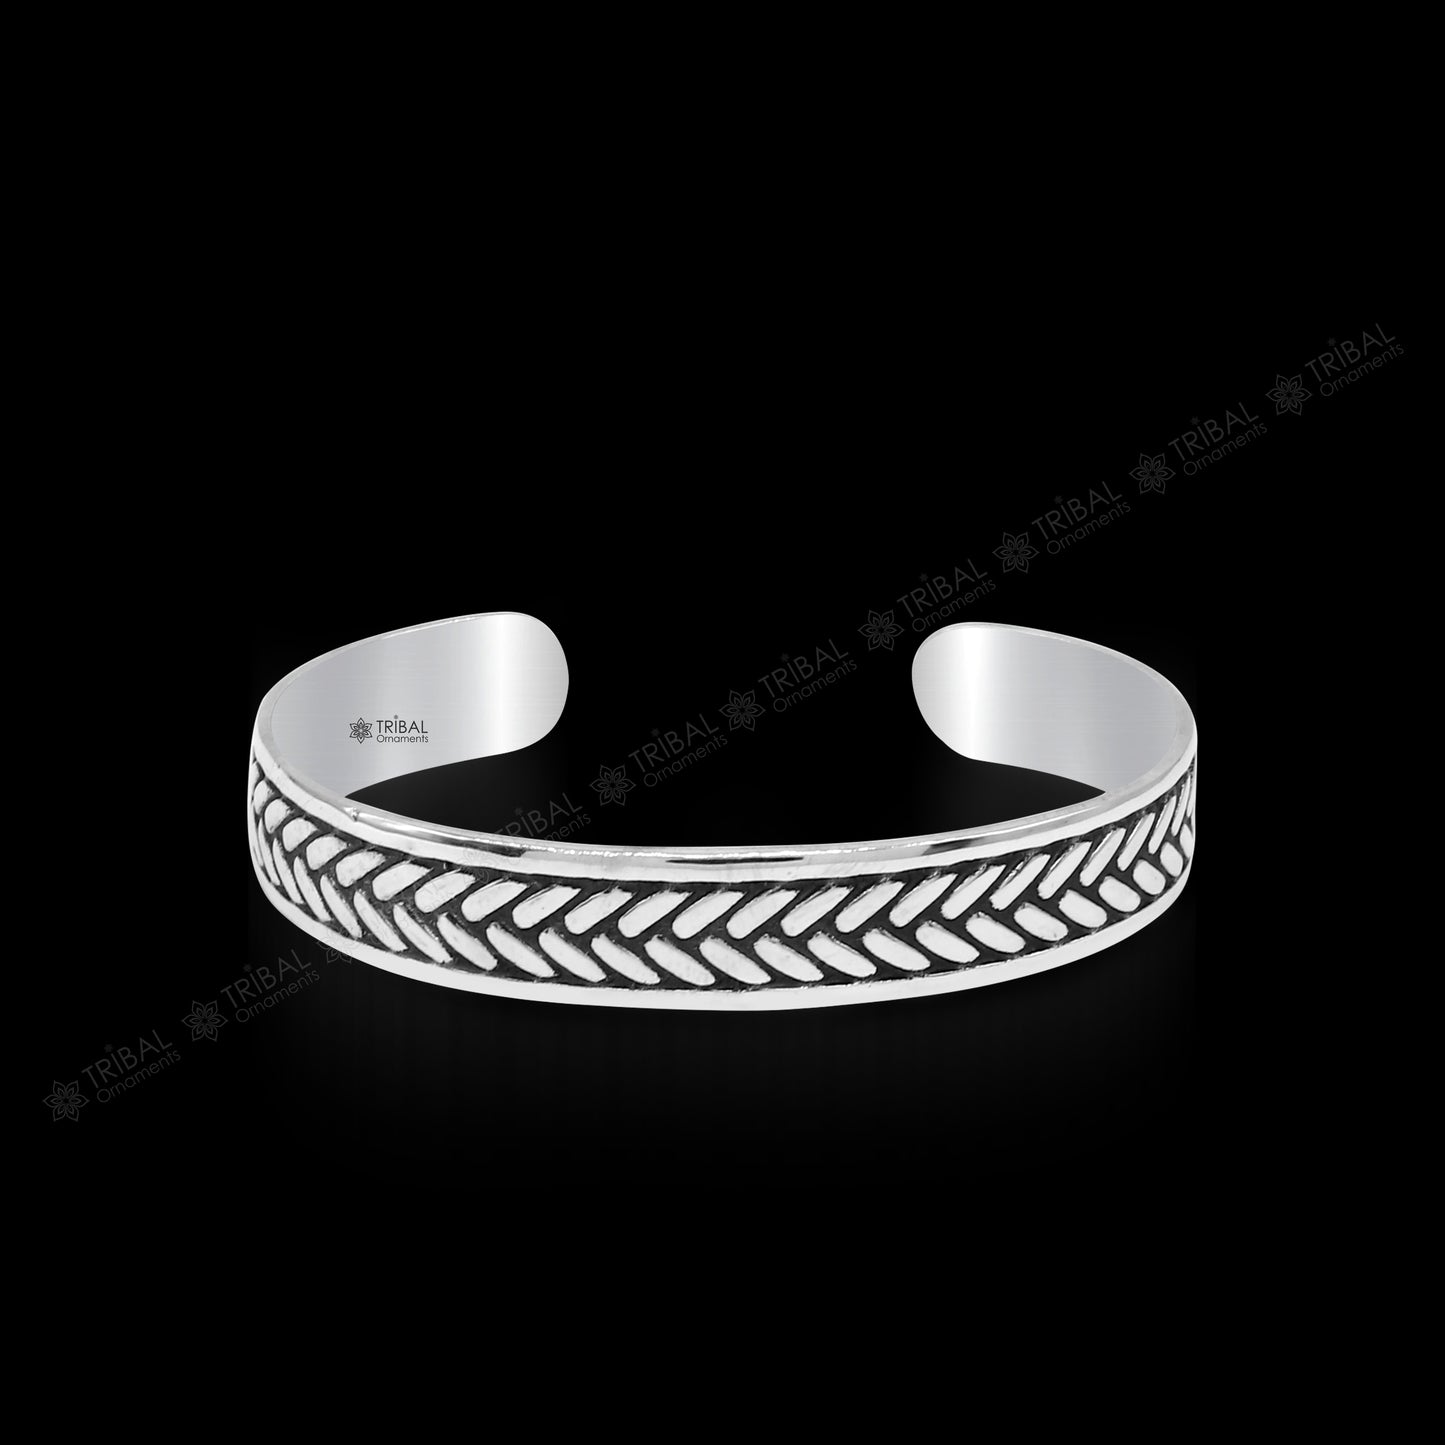 Authentic 925 sterling silver exclusive handmade Tiger design cuff kada bracelet, easy to adjust with your wrist, unisex jewelry cuff44